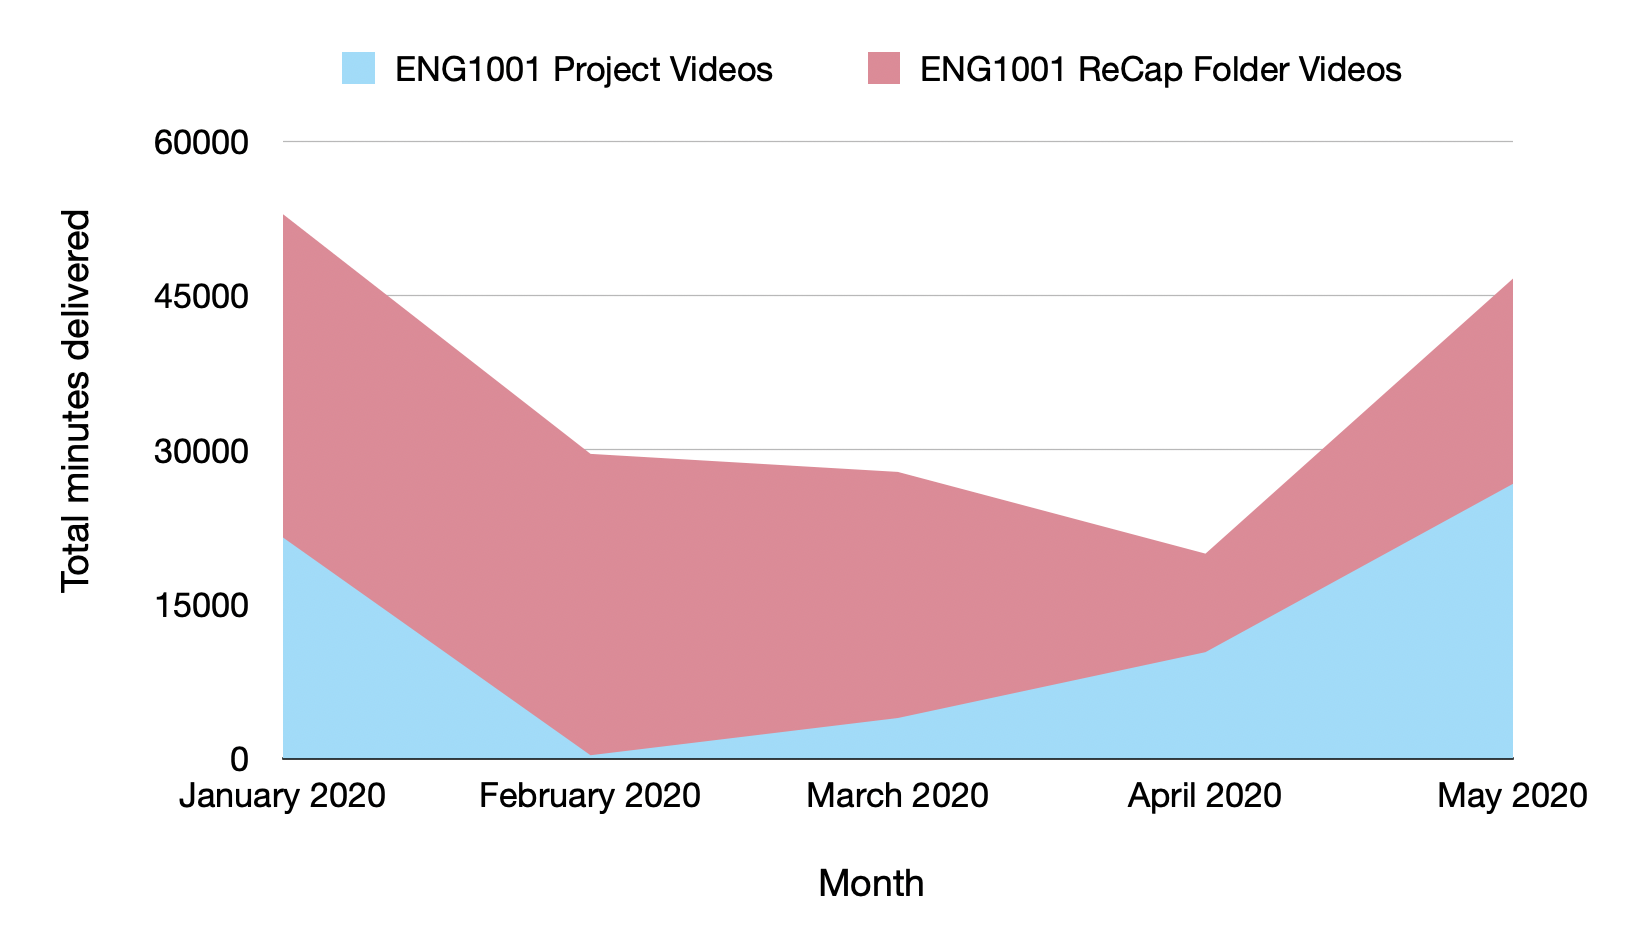 Graph showing a peak in the number of video minutes delivered in January 2020 followed by a decline and then a further increase in May 2020. The ReCap folder videos had more minutes viewed than the project videos in ENG1001